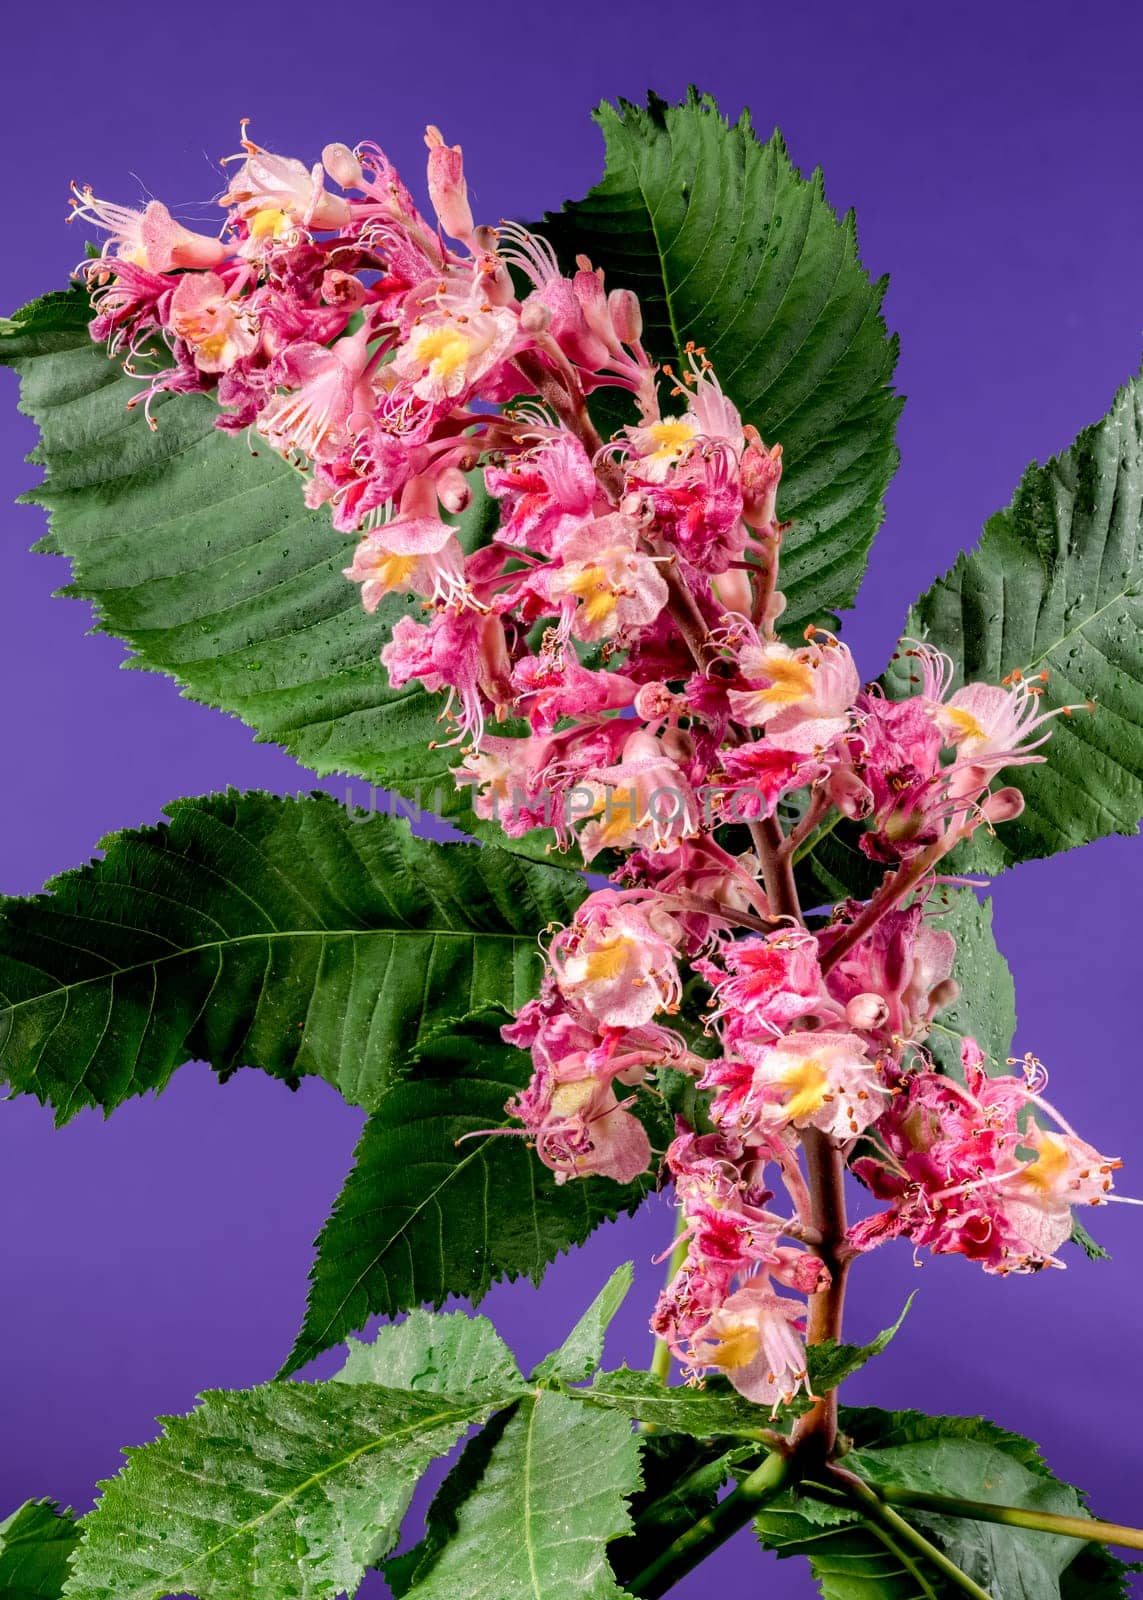 Beautiful Blooming red horse-chestnut on a purple background. Flower head close-up.